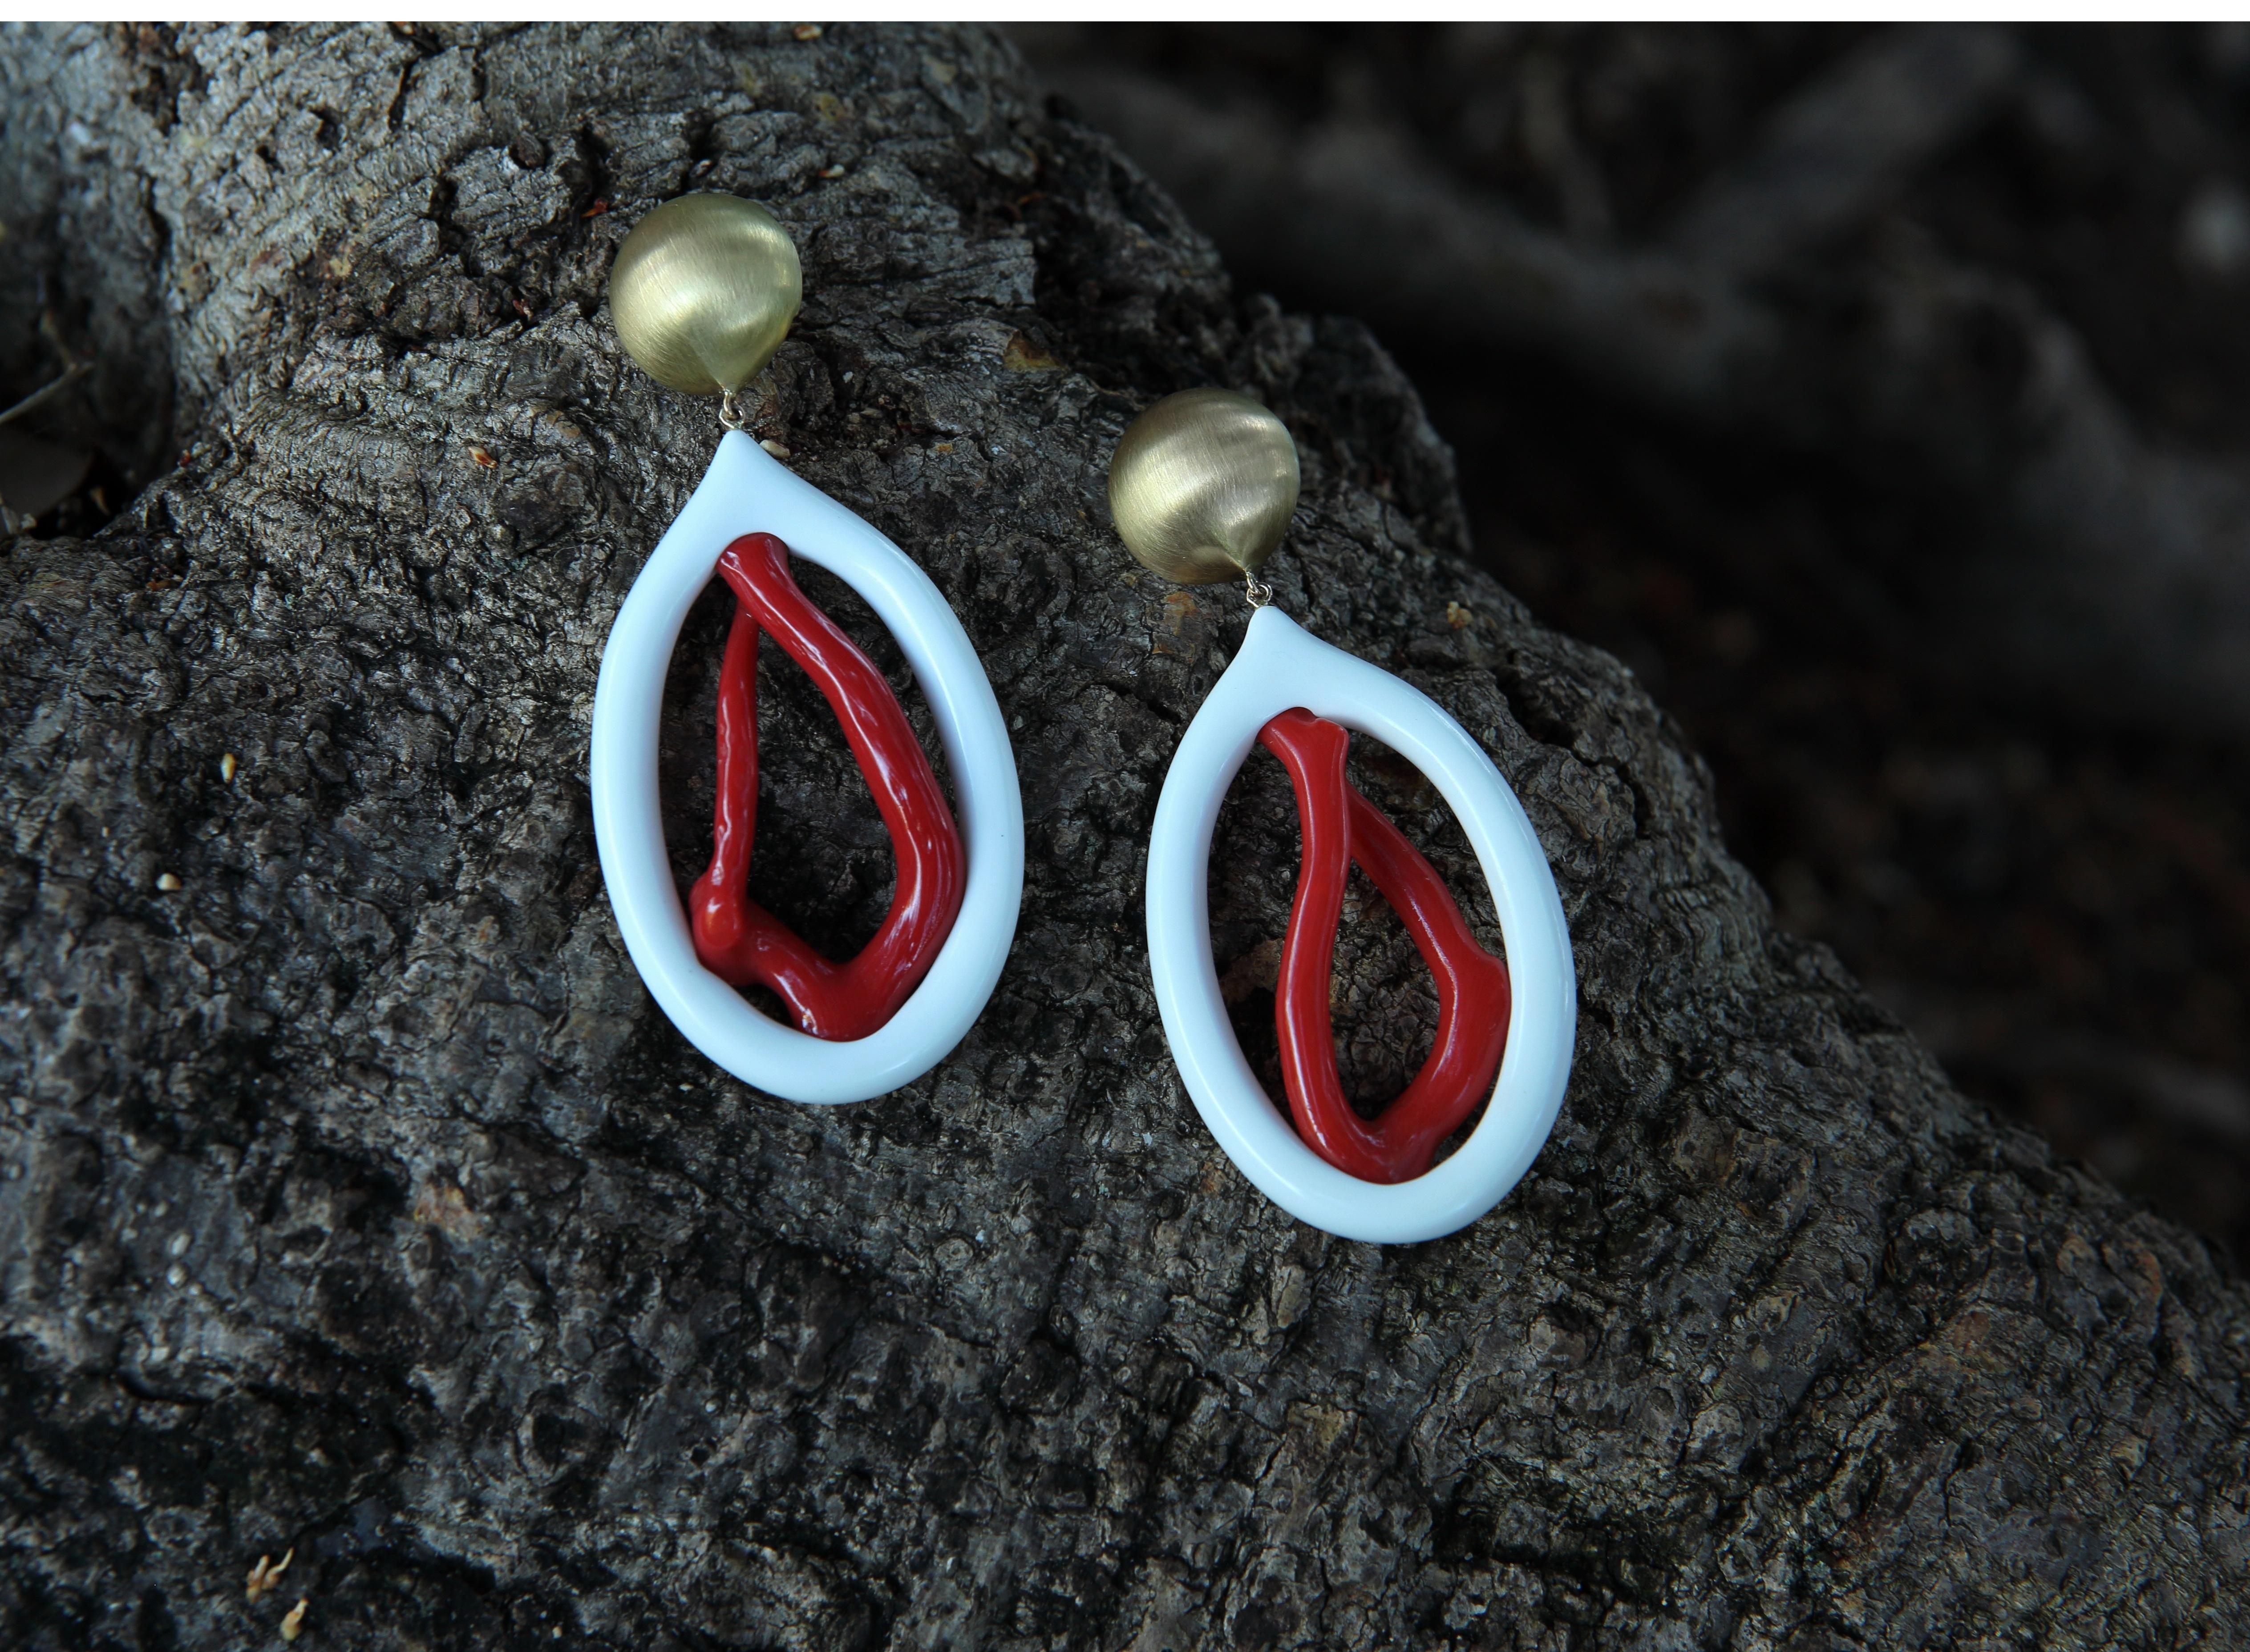 This one-of-a-kind pair of earrings are from Lingjun's 'MERGE' collection, featuring coral branches and Corian, set with a special technique developed by Lingjun in his MA programme in London. 

Up-cycled Corian, hand-carved by Lingjun, carefully